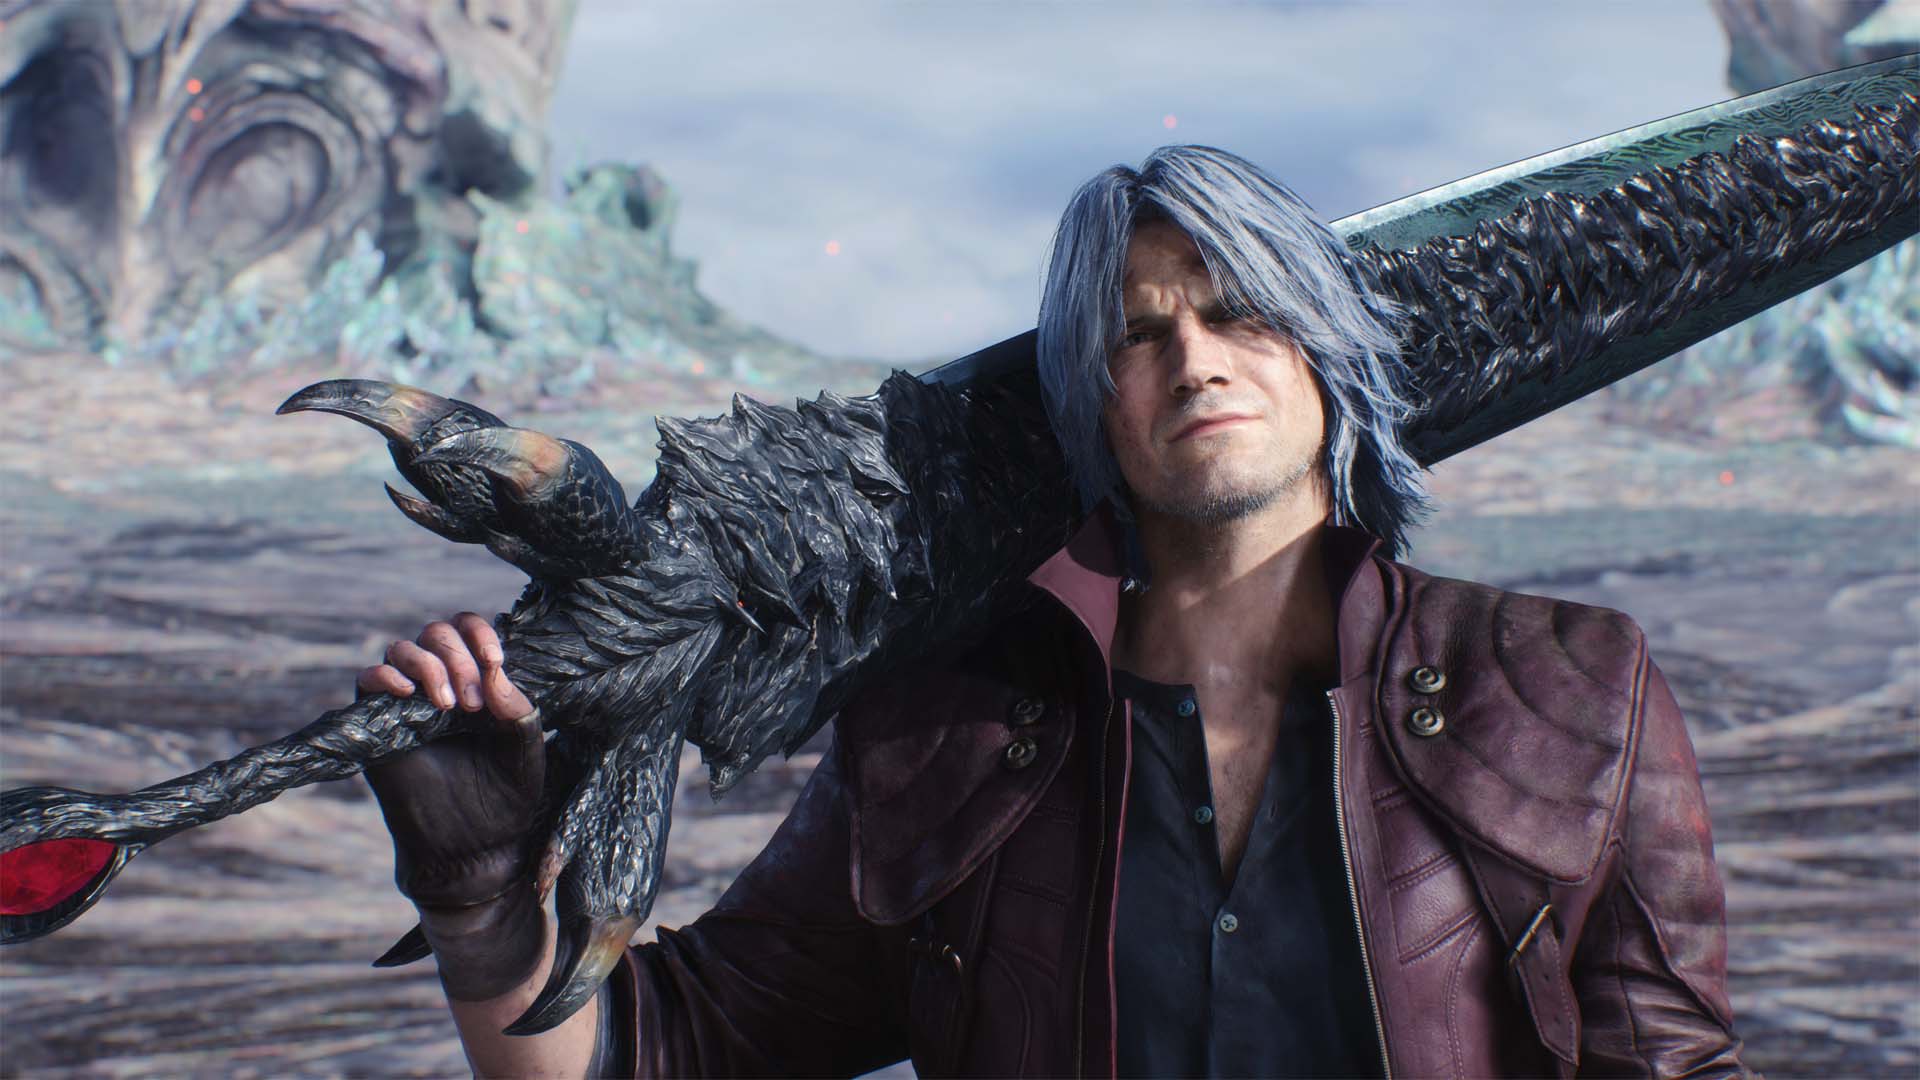 General 1920x1080 Devil May Cry Devil May Cry 5 Dante (Devil May Cry) video game characters Capcom